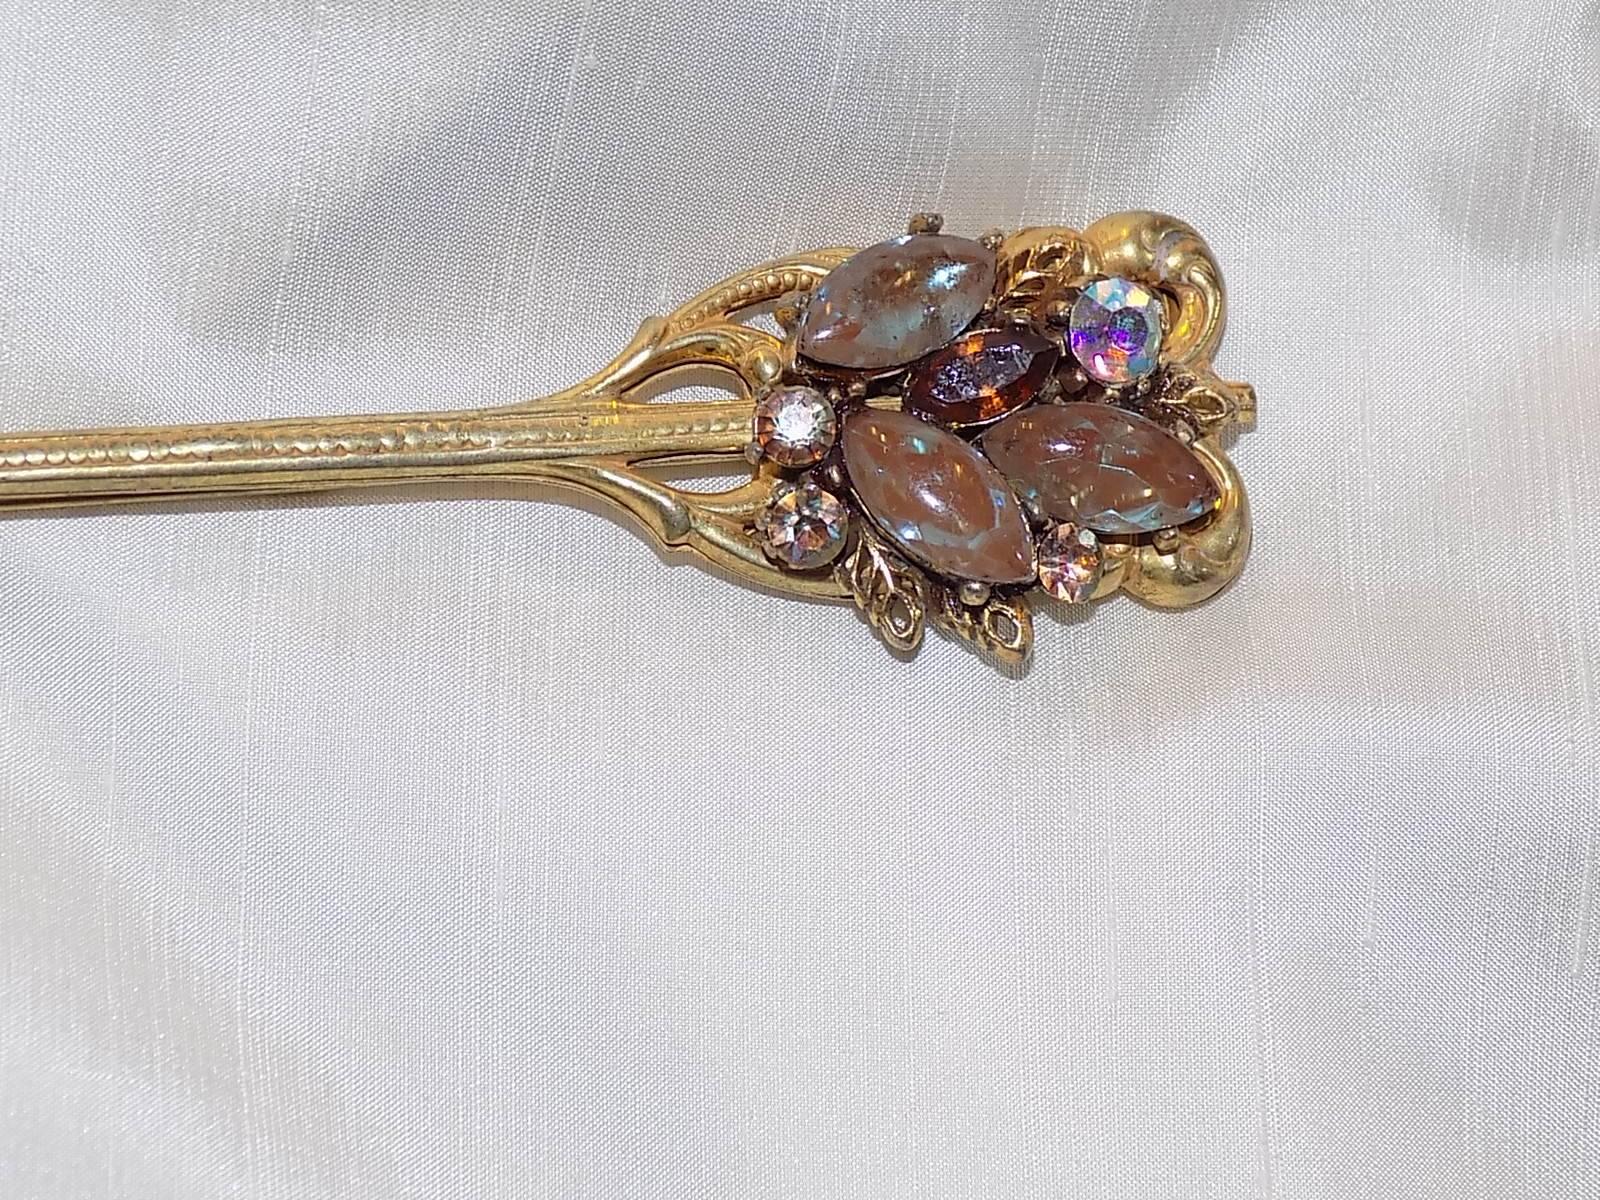  Beautiful Miriam Haskell large jeweled arrow pin brooch . signed in pristine condition 5